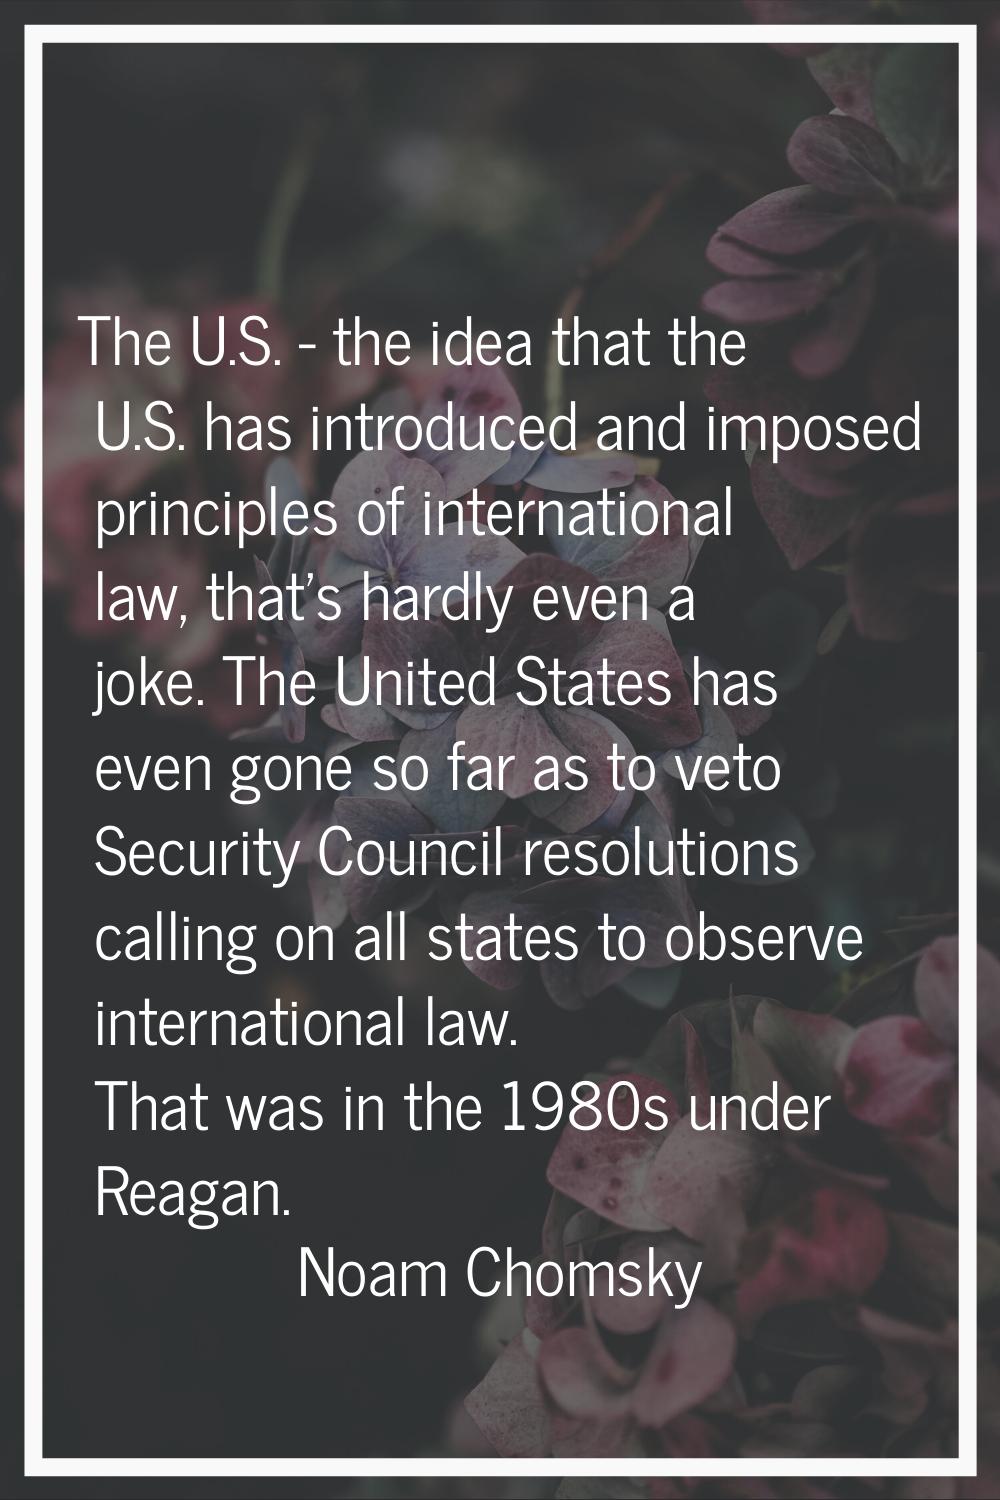 The U.S. - the idea that the U.S. has introduced and imposed principles of international law, that'